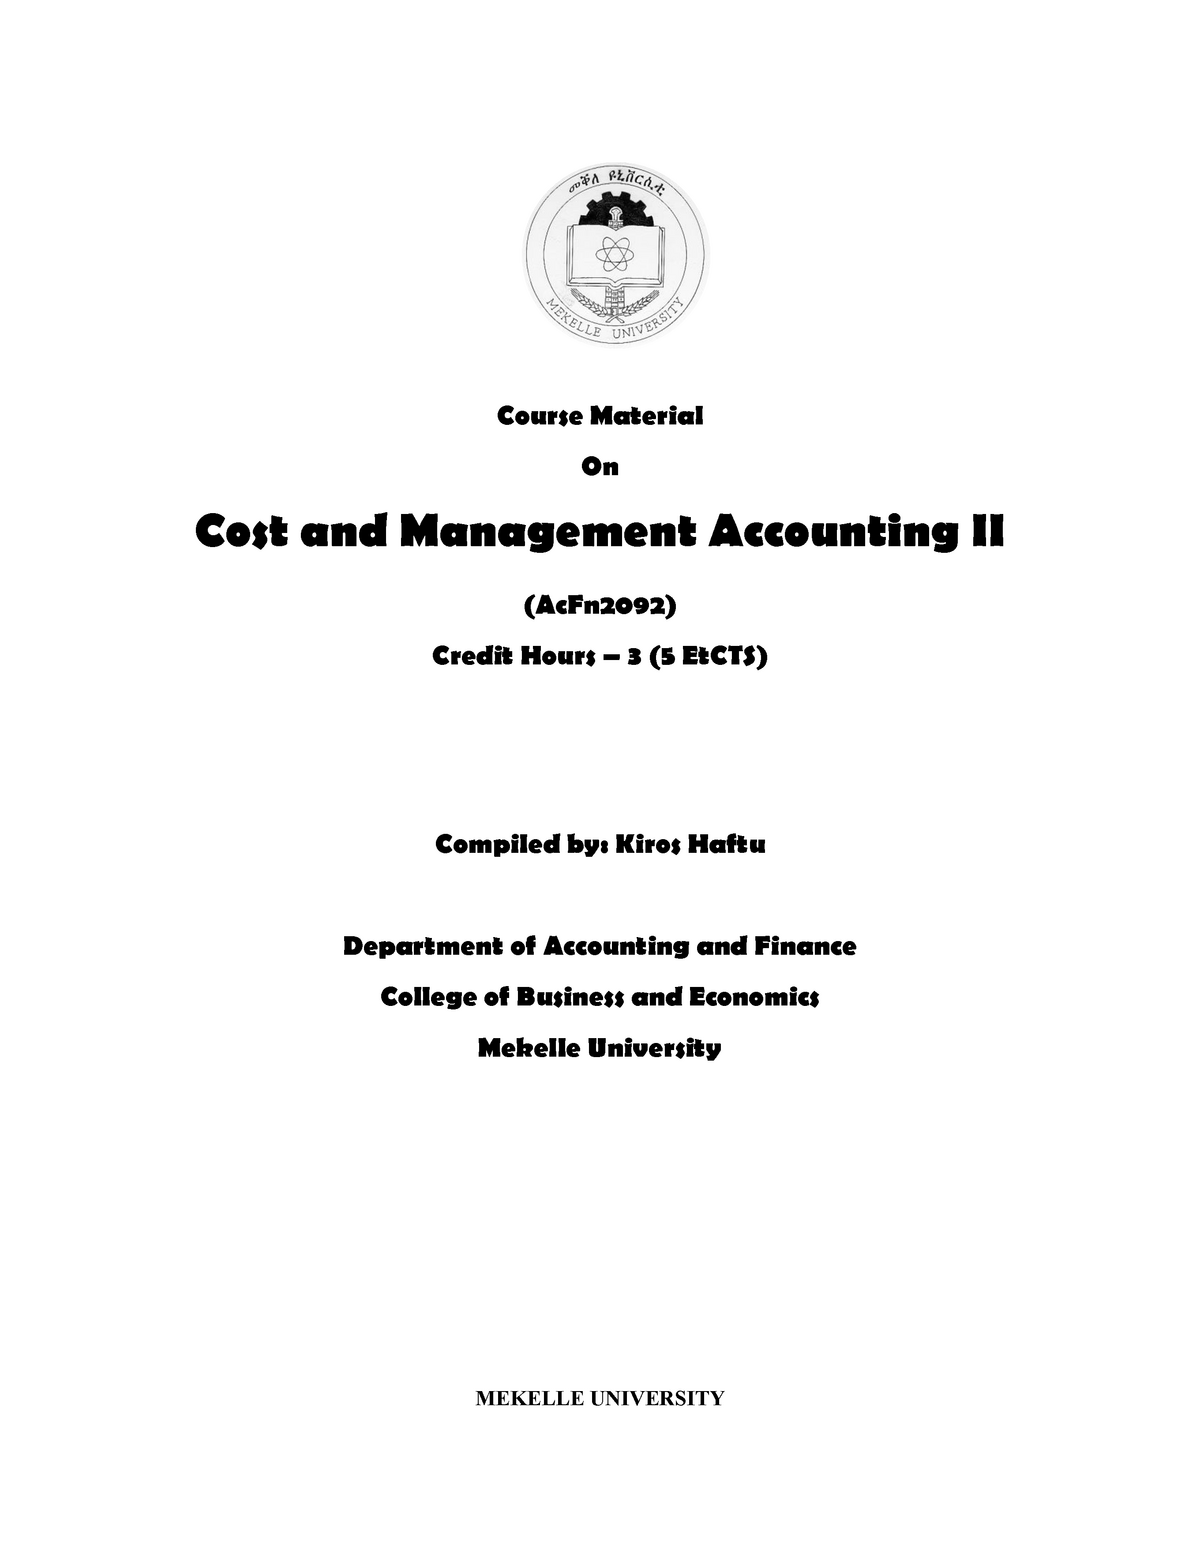 article review of cost and management accounting